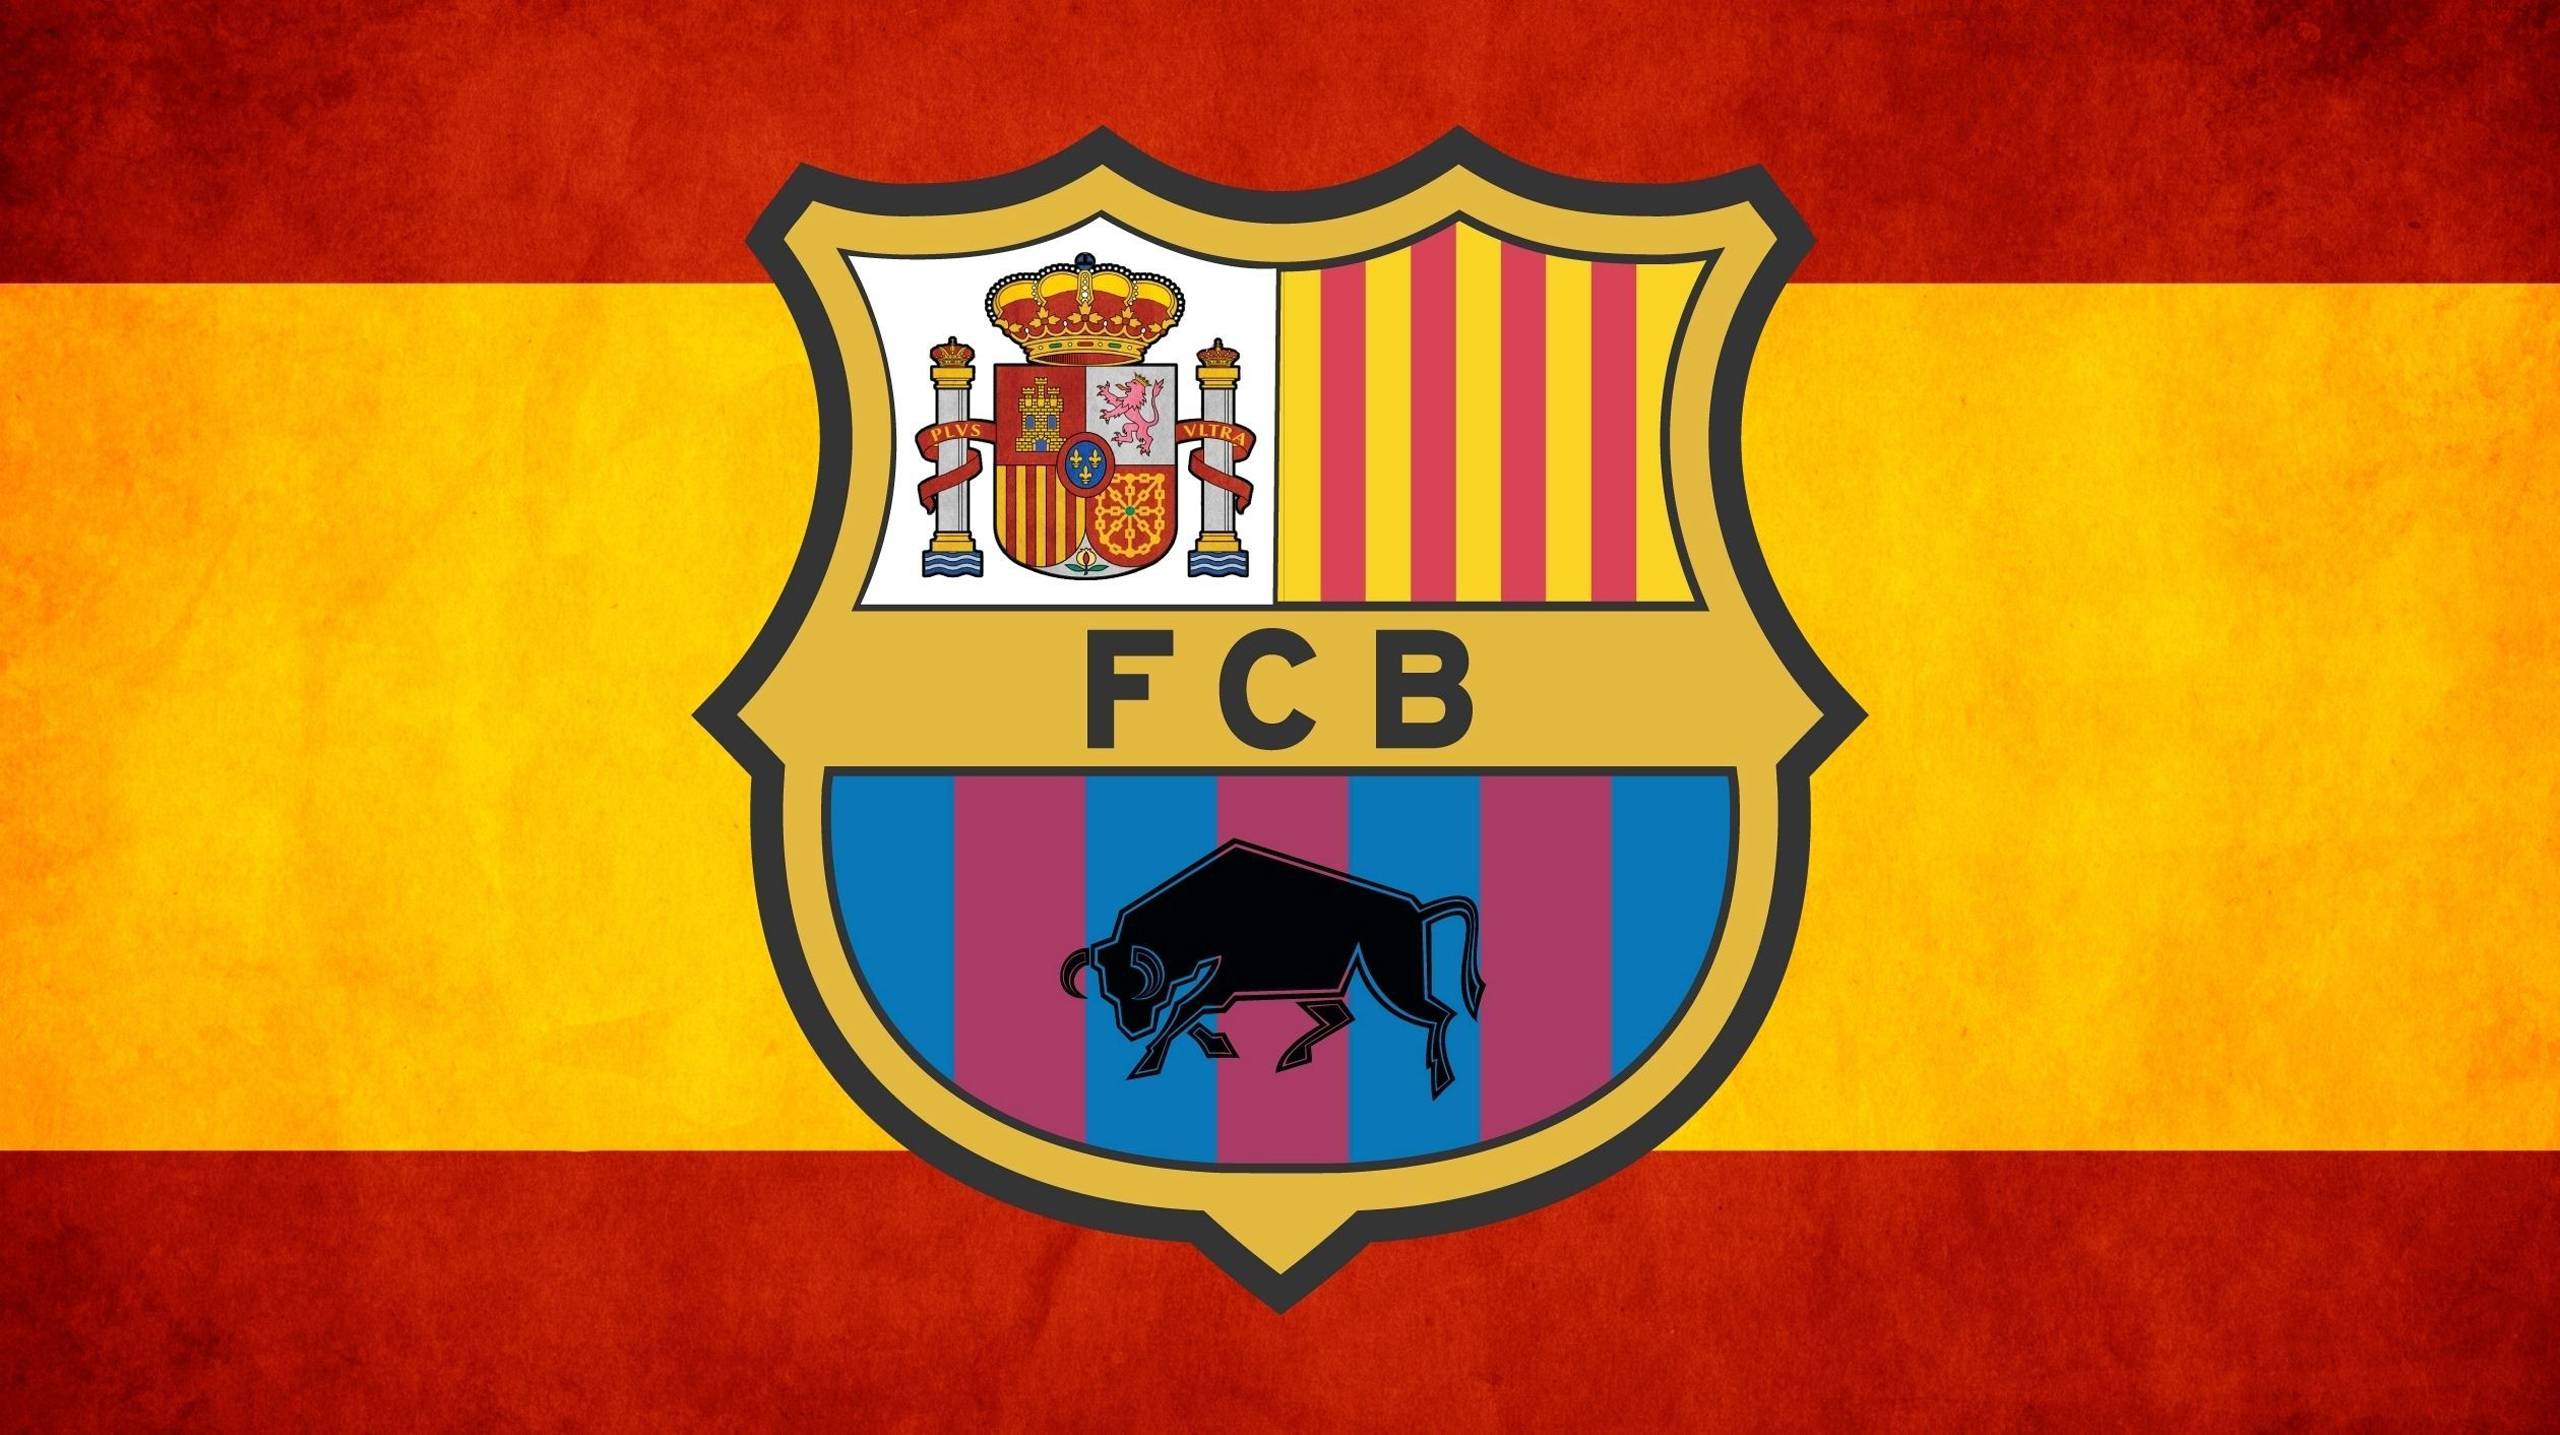 Fcb Wallpaper Backgrounds Gallery Wallpapers Hd 1280x800PX